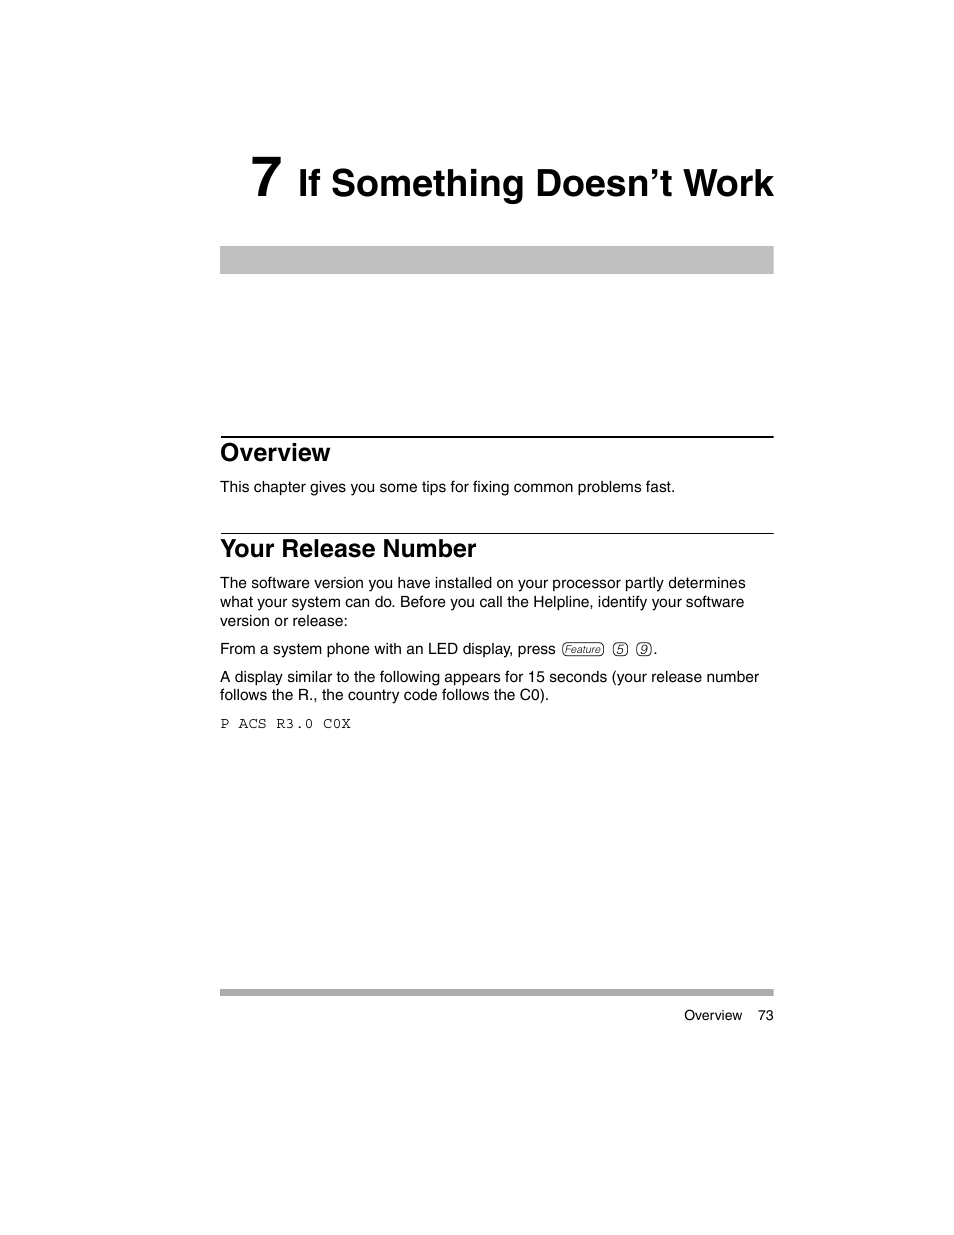 7 if something doesn’t work, Overview, Your release number | Chapter 7, If something doesn’t work, If something, Doesn’t work, Something doesn’t work | Avaya PARTNER-18D User Manual | Page 83 / 106